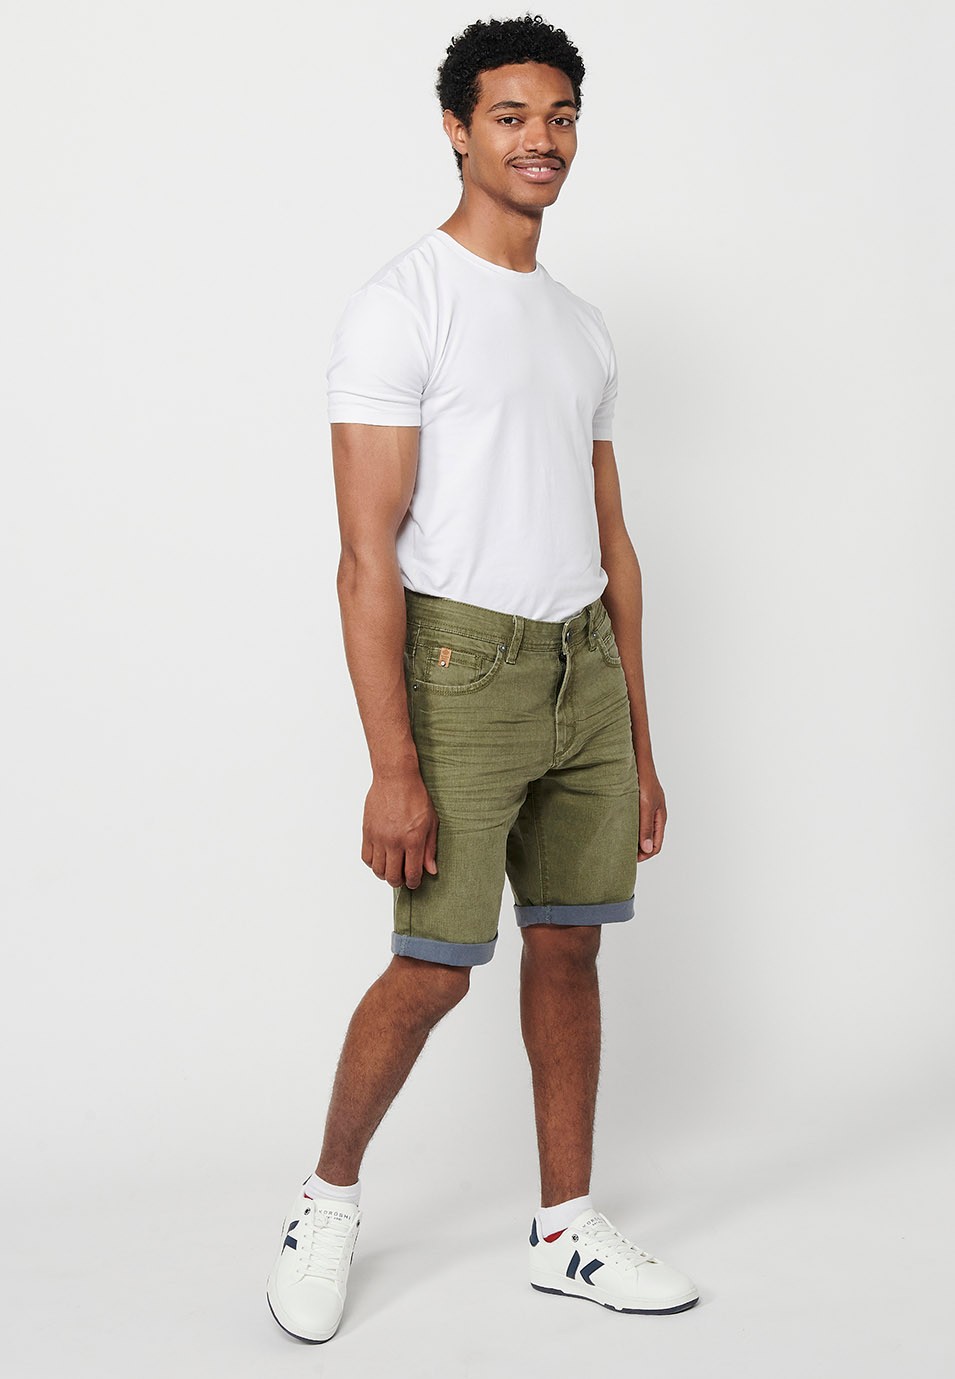 Denim Bermuda shorts with turn-up finish, front closure with zipper and button with five pockets, one pocket pocket, Olive Color for Men